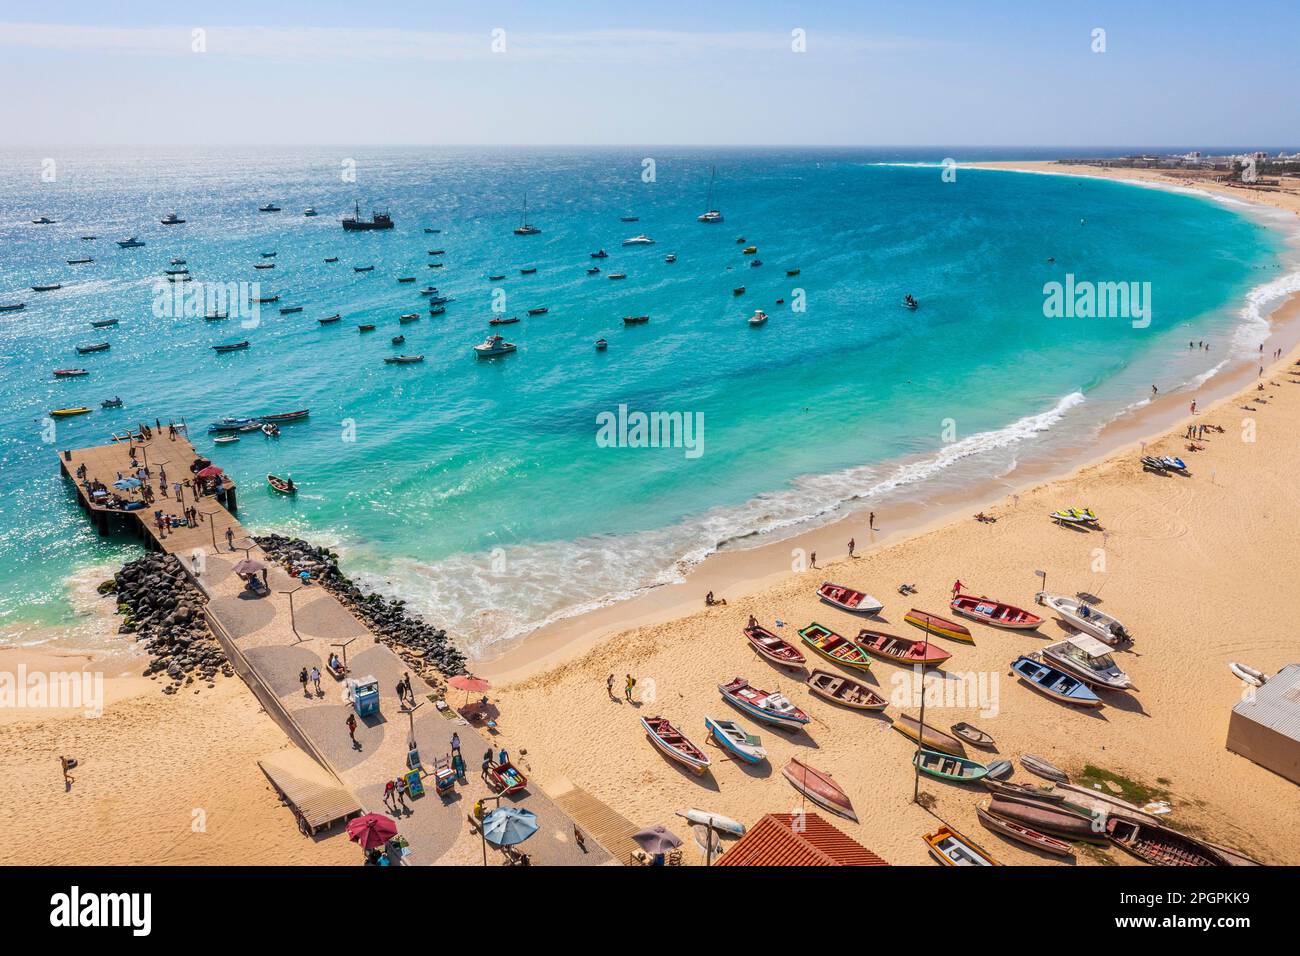 Pier and boats on turquoise water in city of Santa Maria, island of Sal, Cape Verde Stock Photo